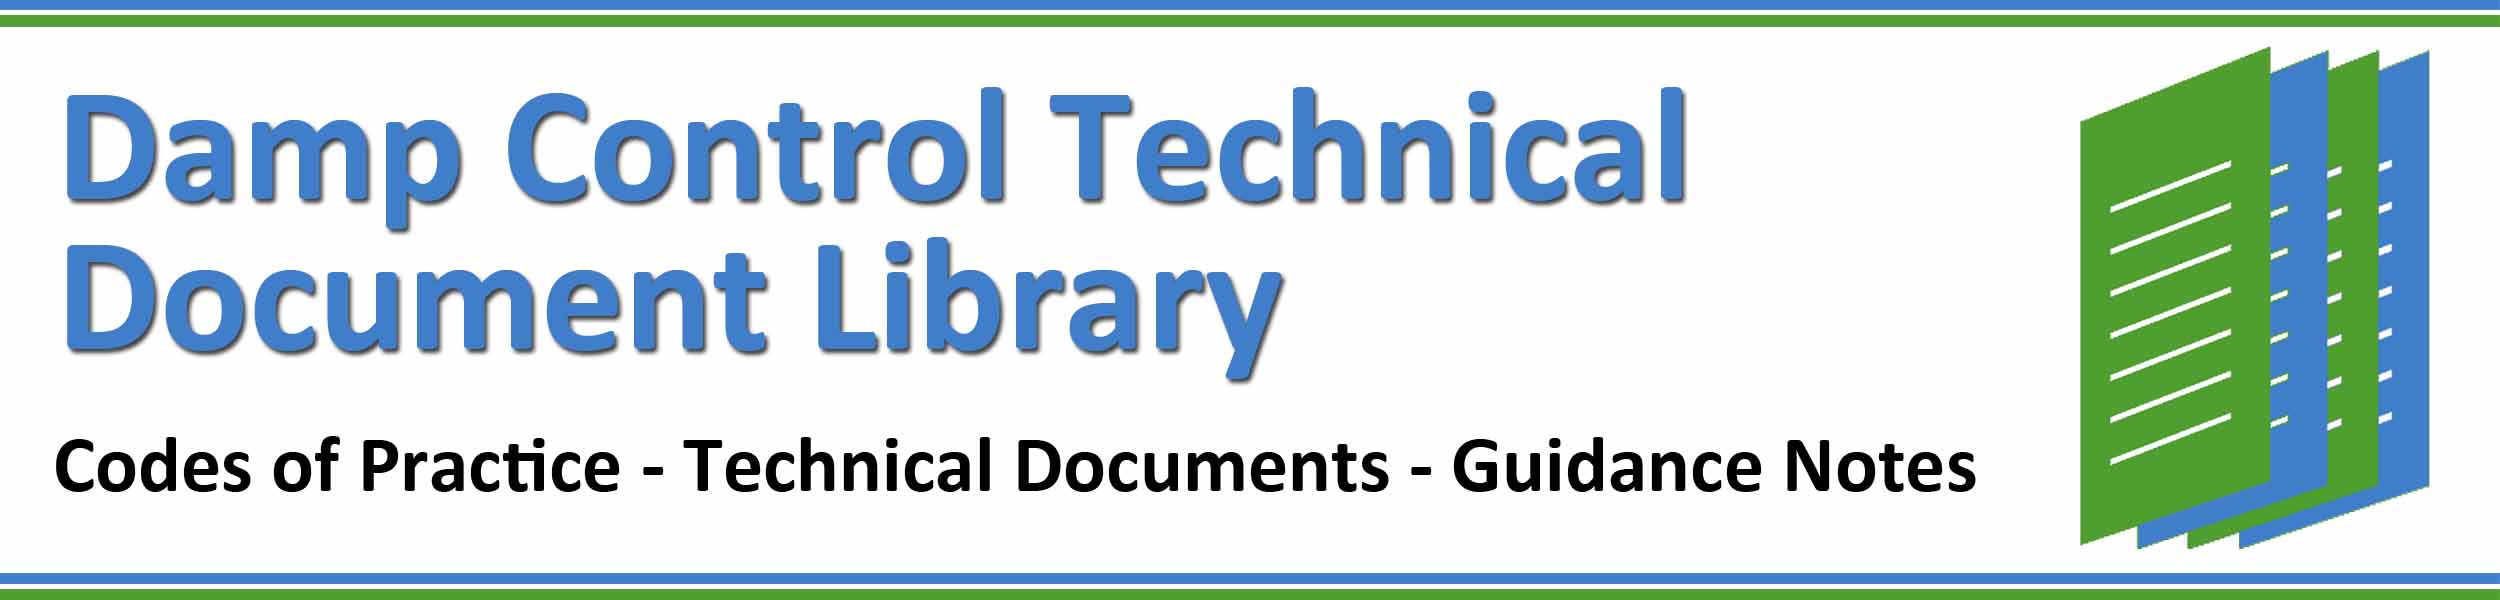 Damp-Control-Document-Library-Aug-2020